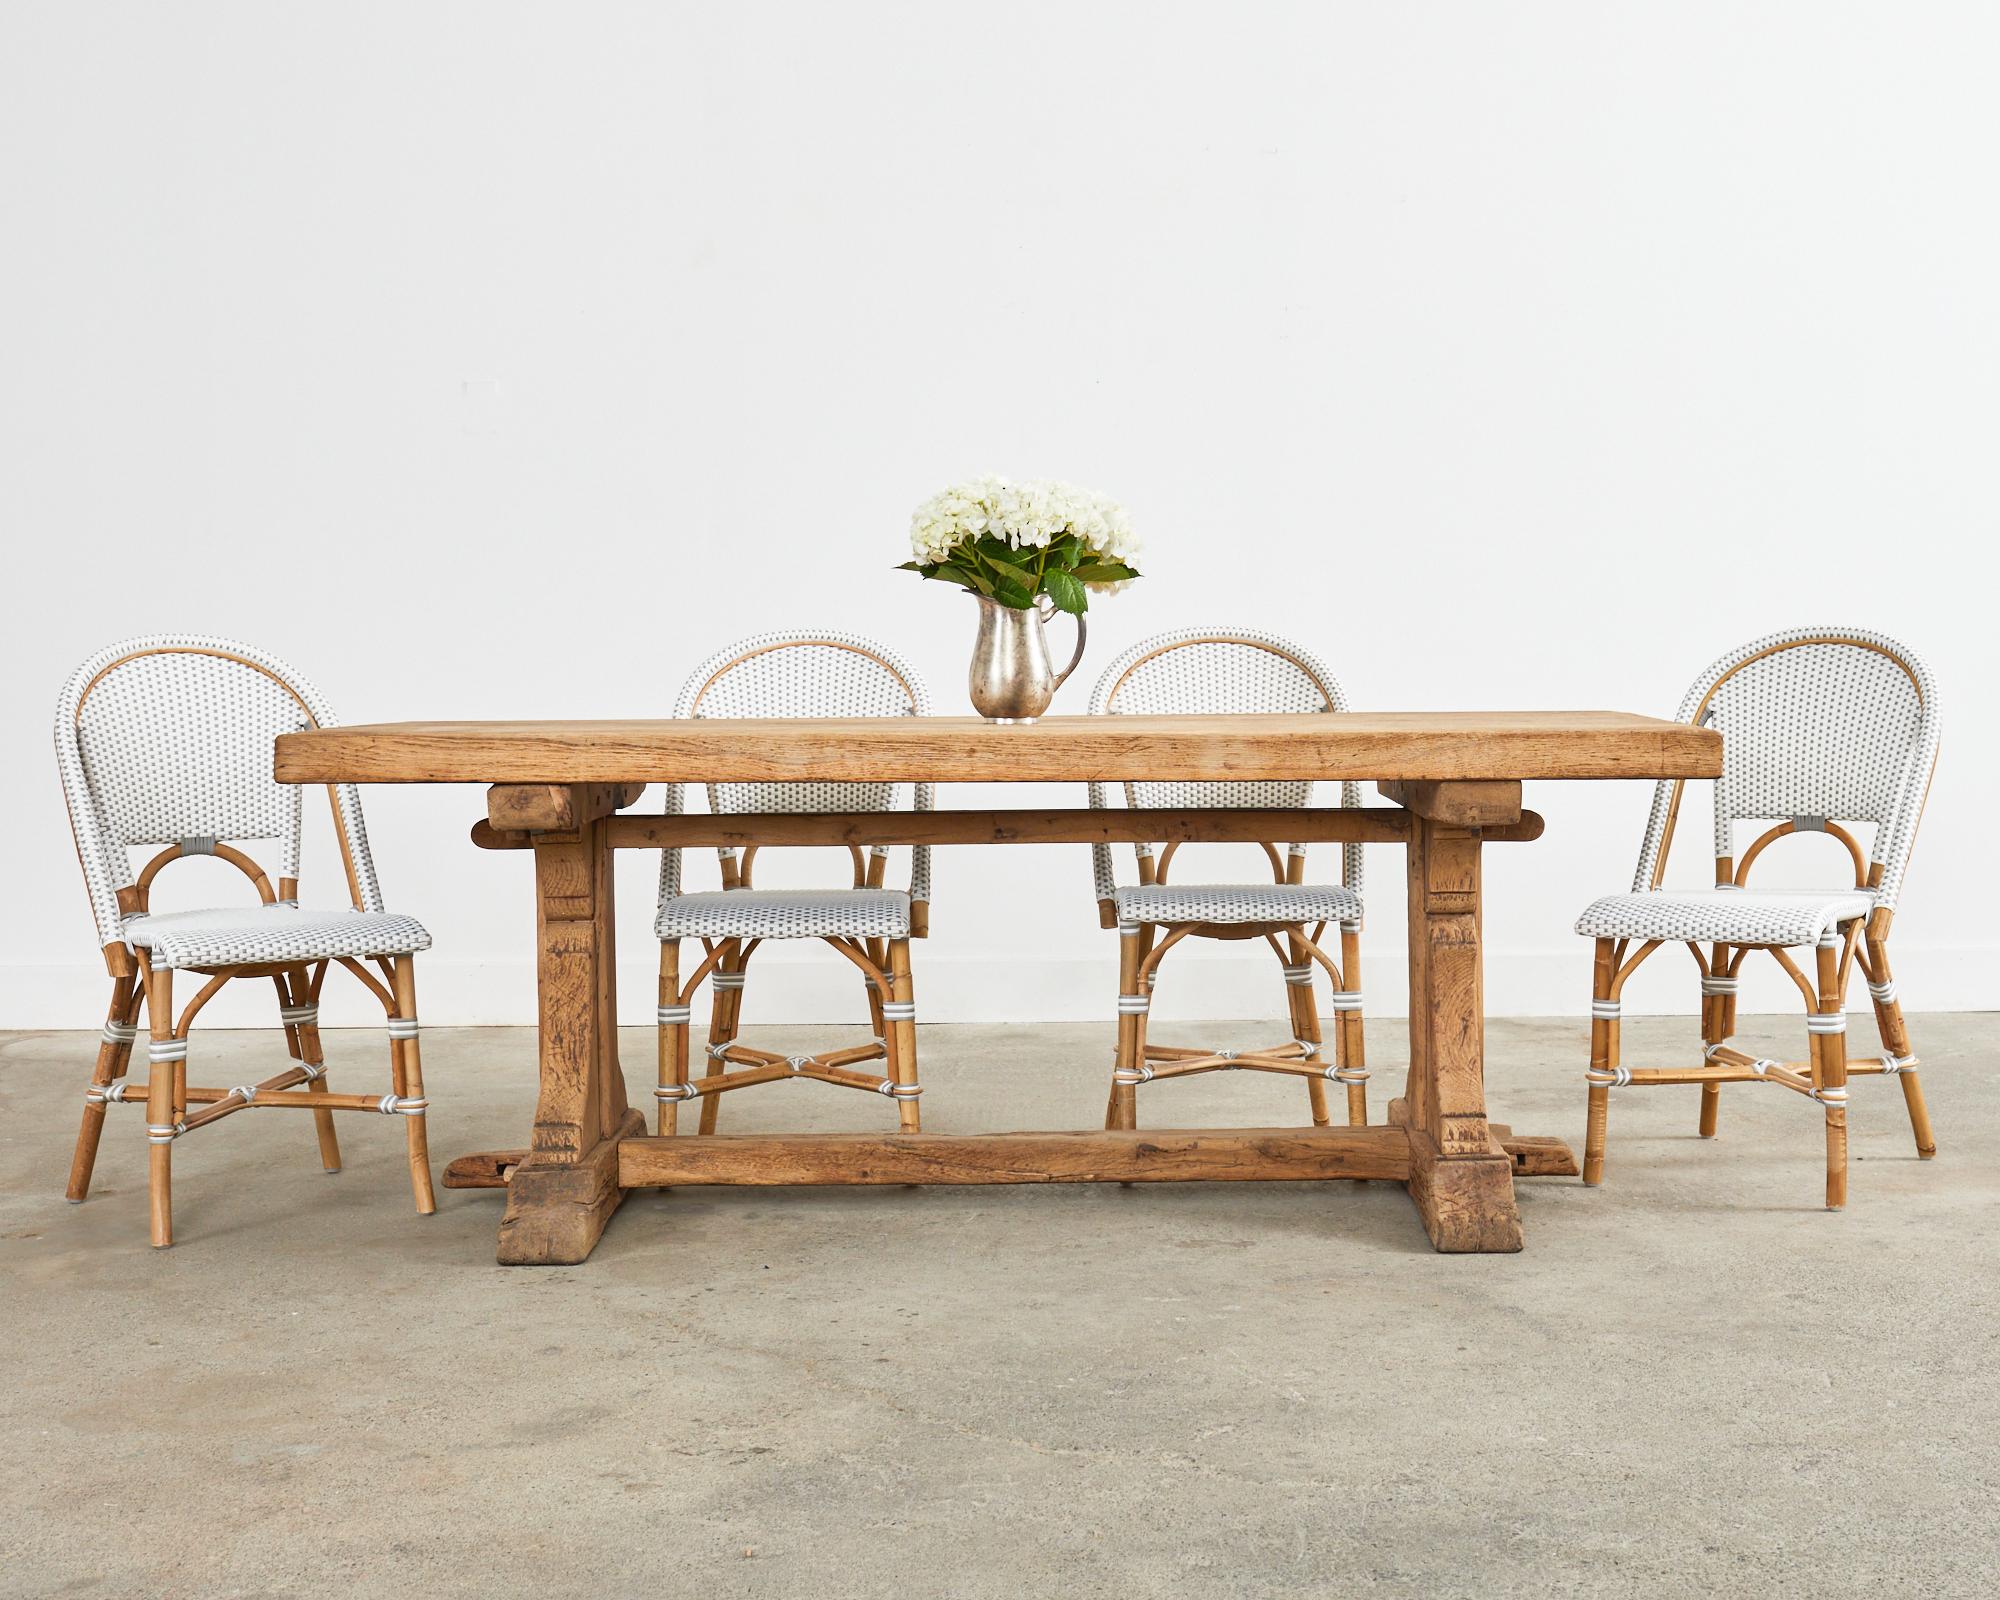 One of our absolute favorites is this country French farmhouse dining table featuring a bleached oak finish. Very heavy and solid with rough-hewn weathered patina on the trestle base. The rustic table has an oak slab top measuring nearly 3 inches